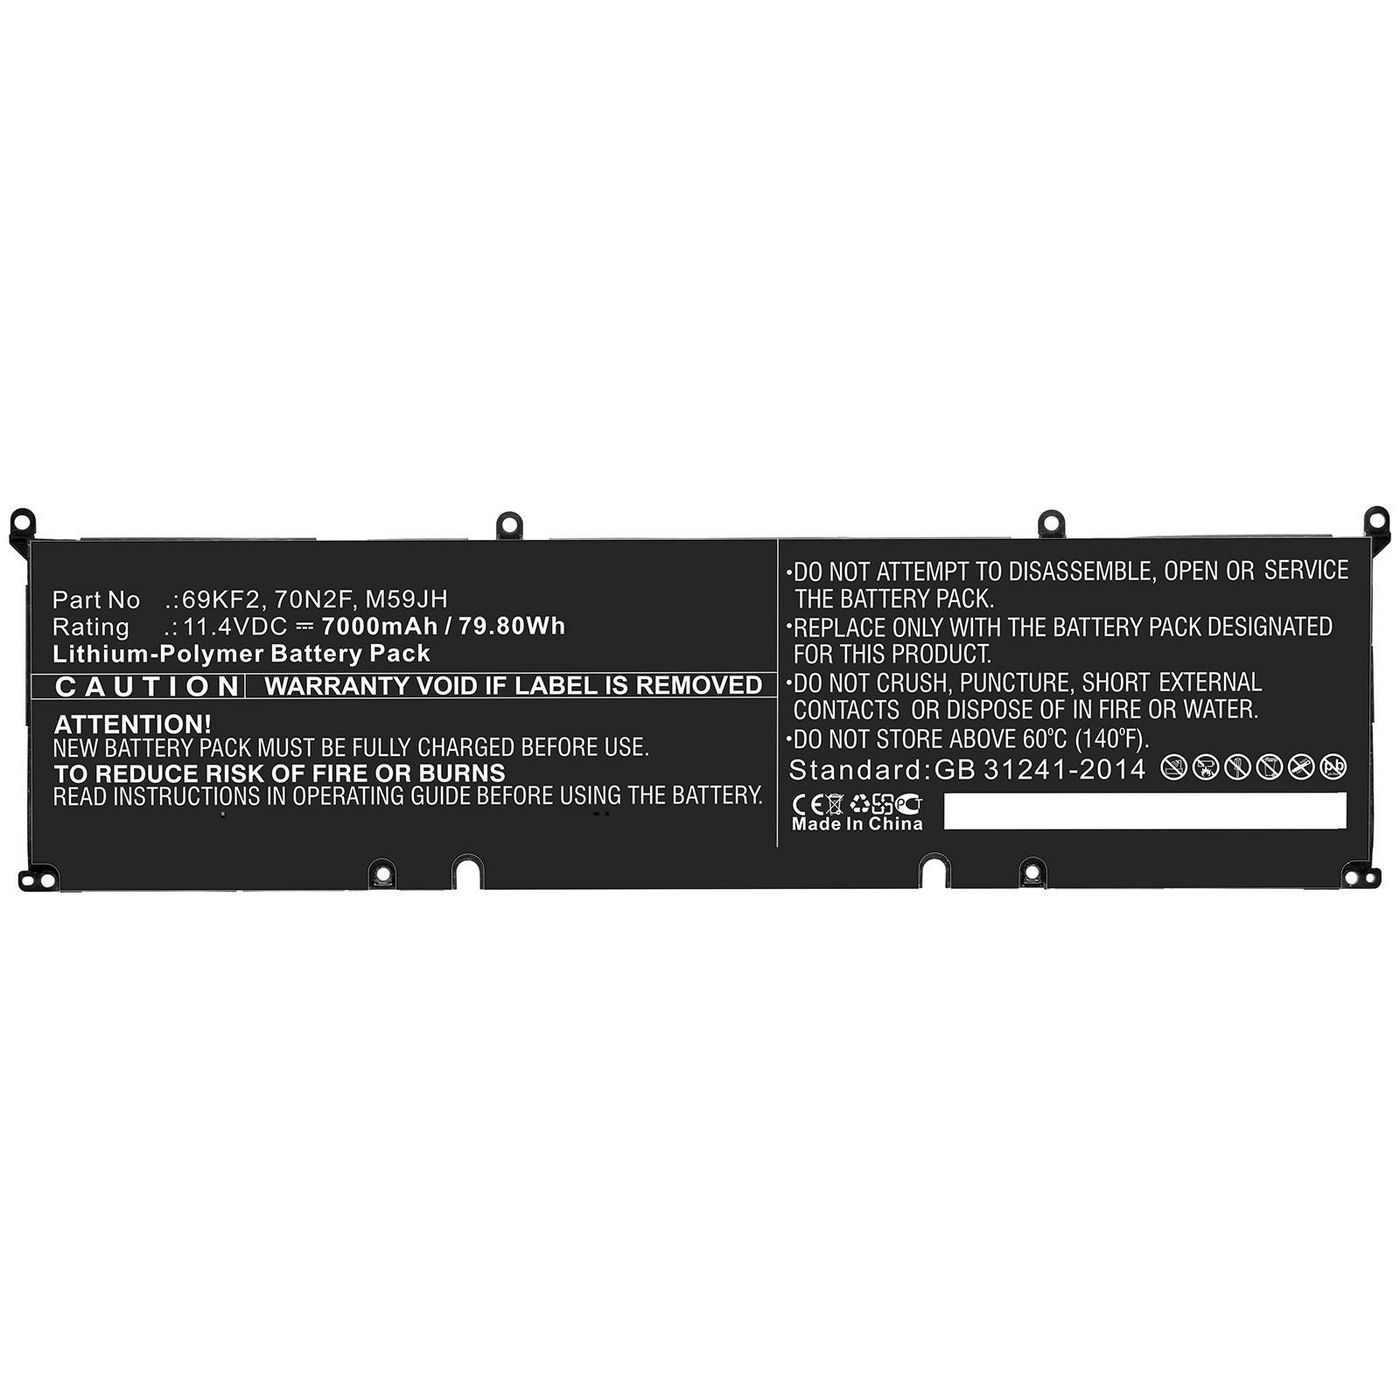 CoreParts MBXDE-BA0209 W125993410 Laptop Battery for Dell 